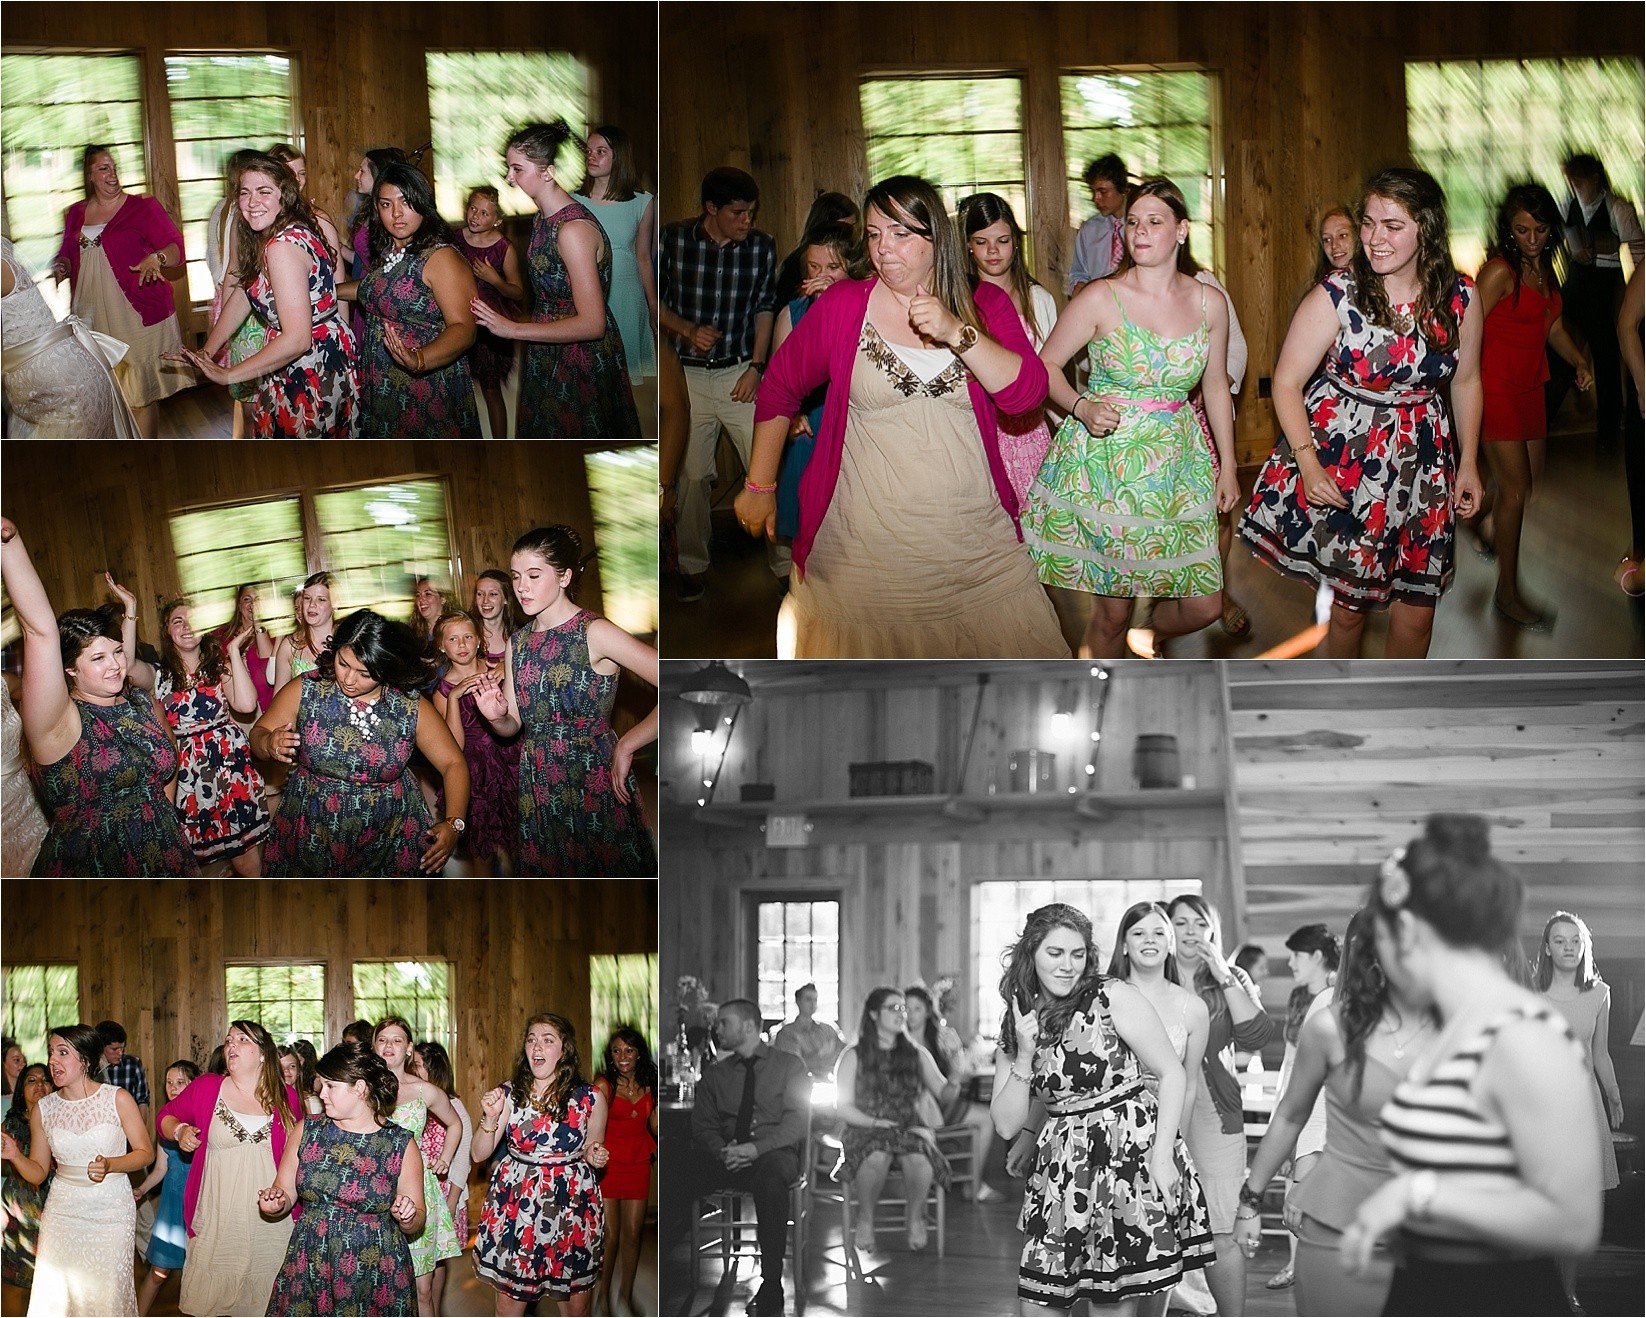 Shutter drag during the dancing at the reception at Caroline and Evans mountain wedding at yesterday spaces in asheville leicester north carolina